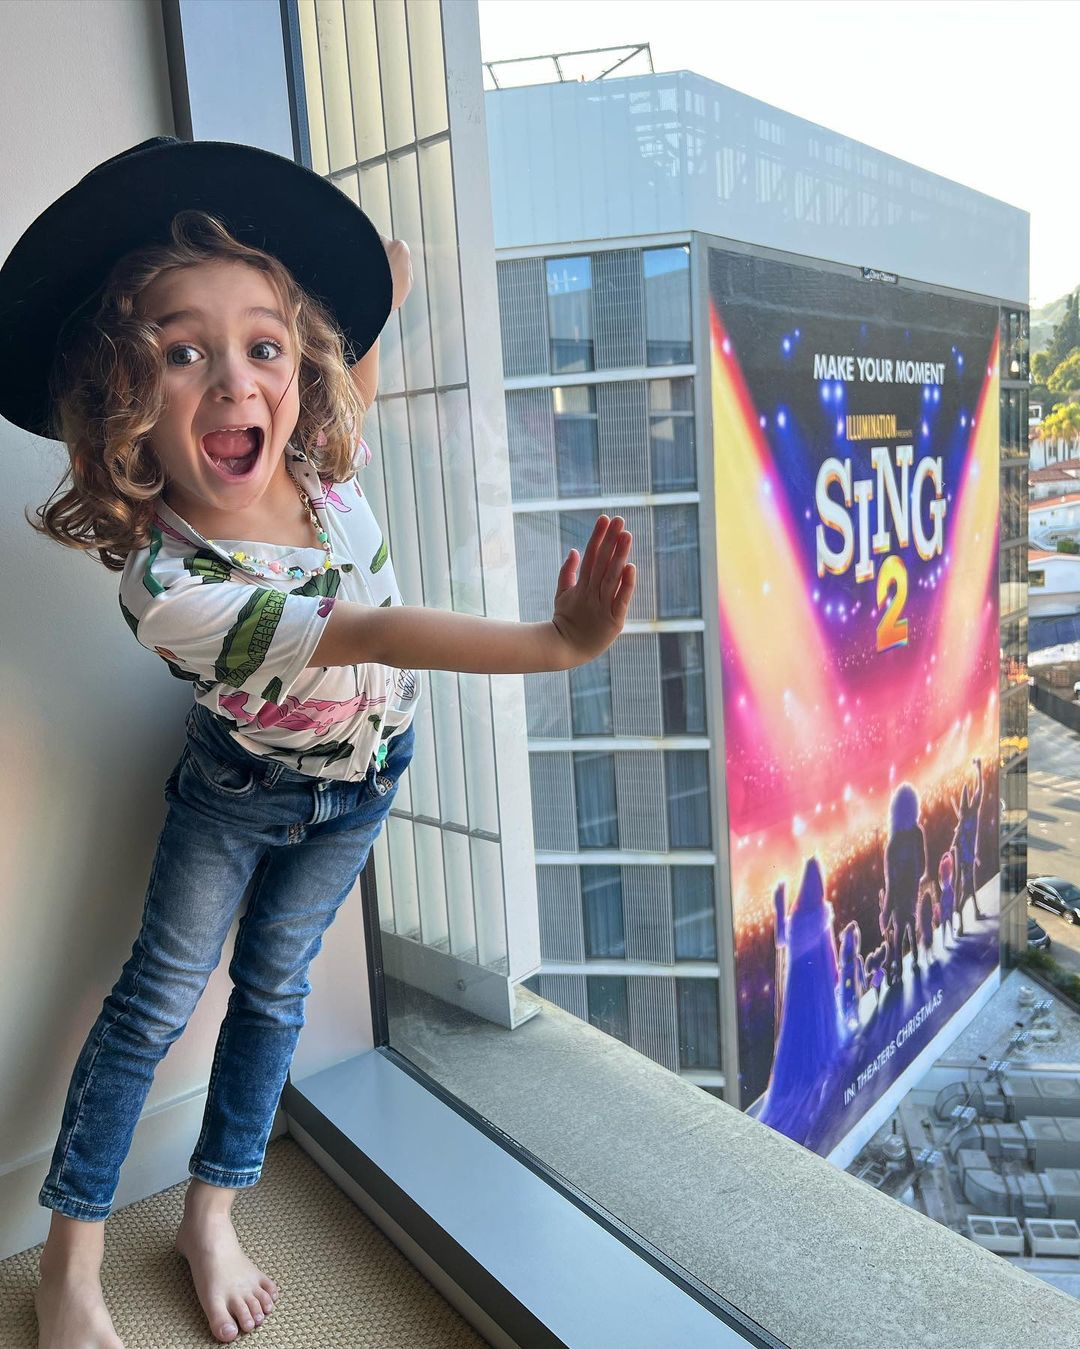 boy standing by window in with movie premiere sign